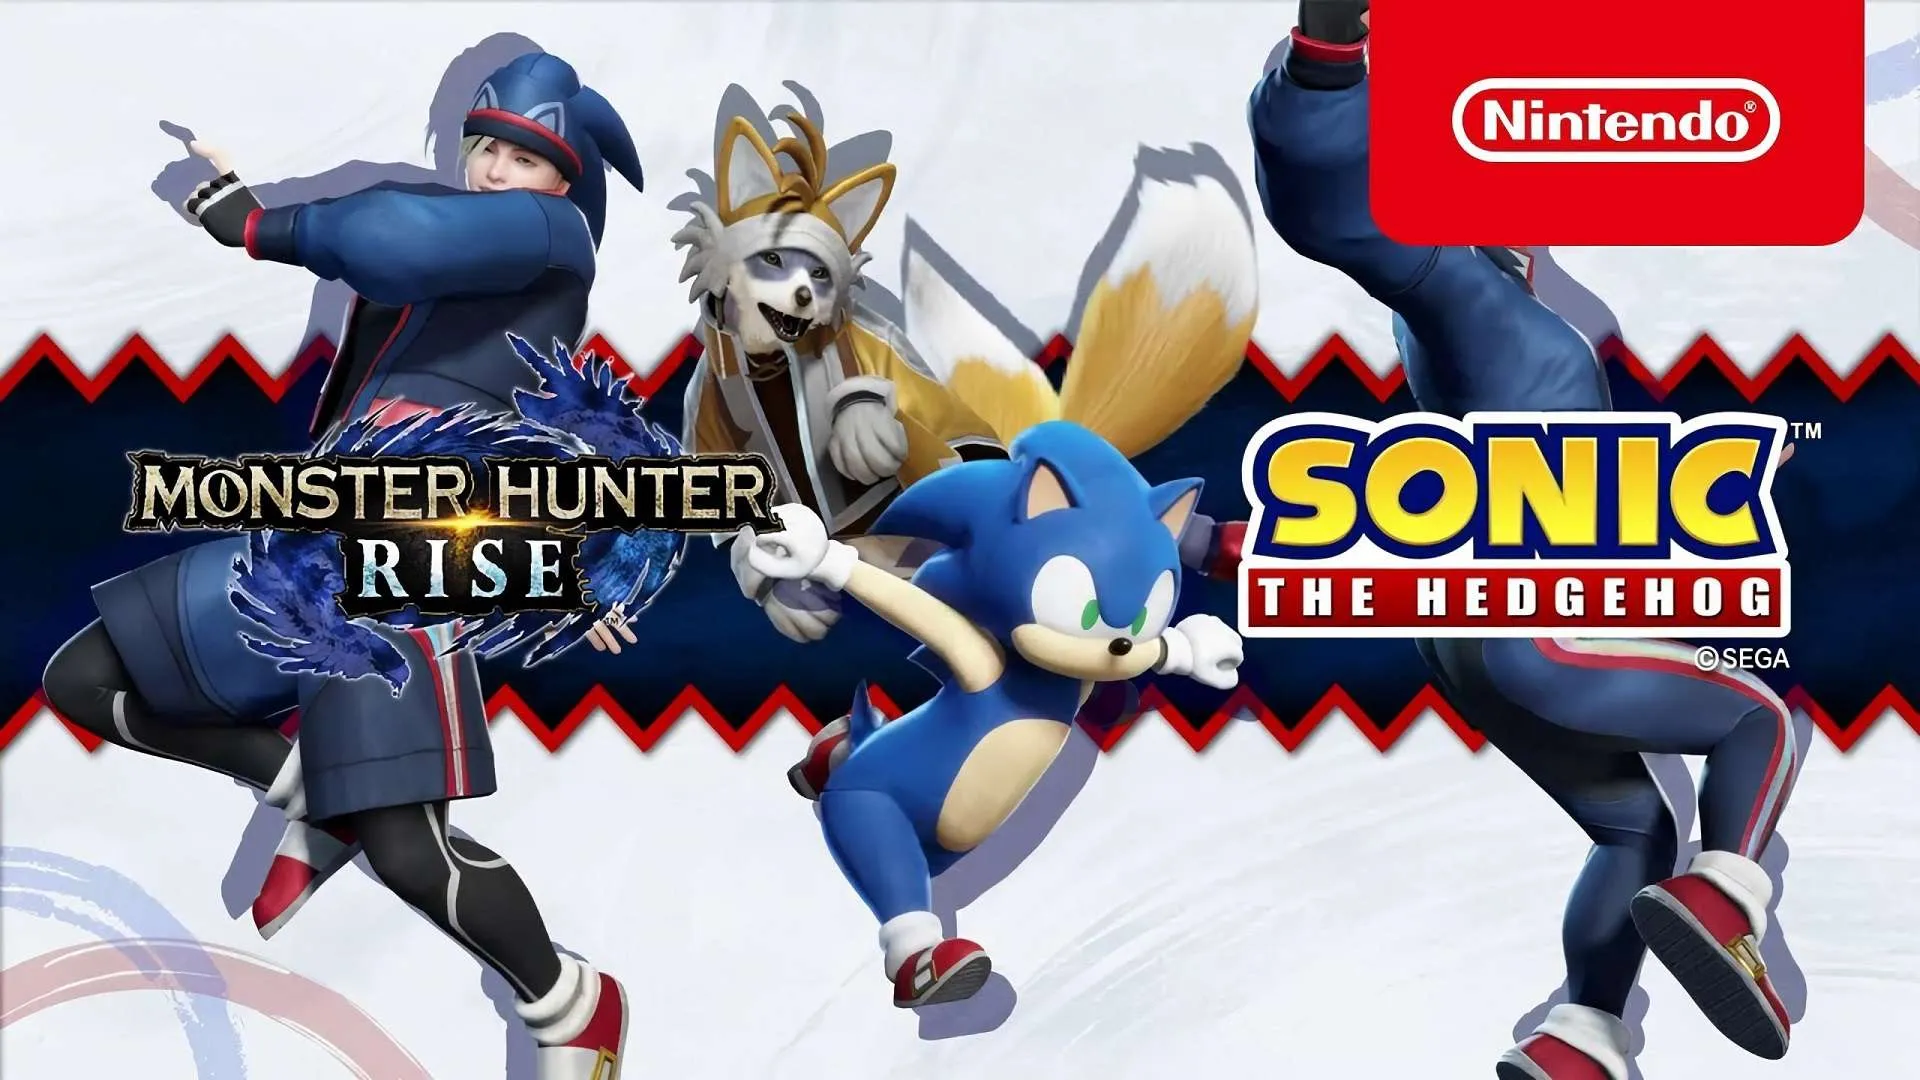 The Monster Hunter Rise - Sonic the Hedgehog Collaboration